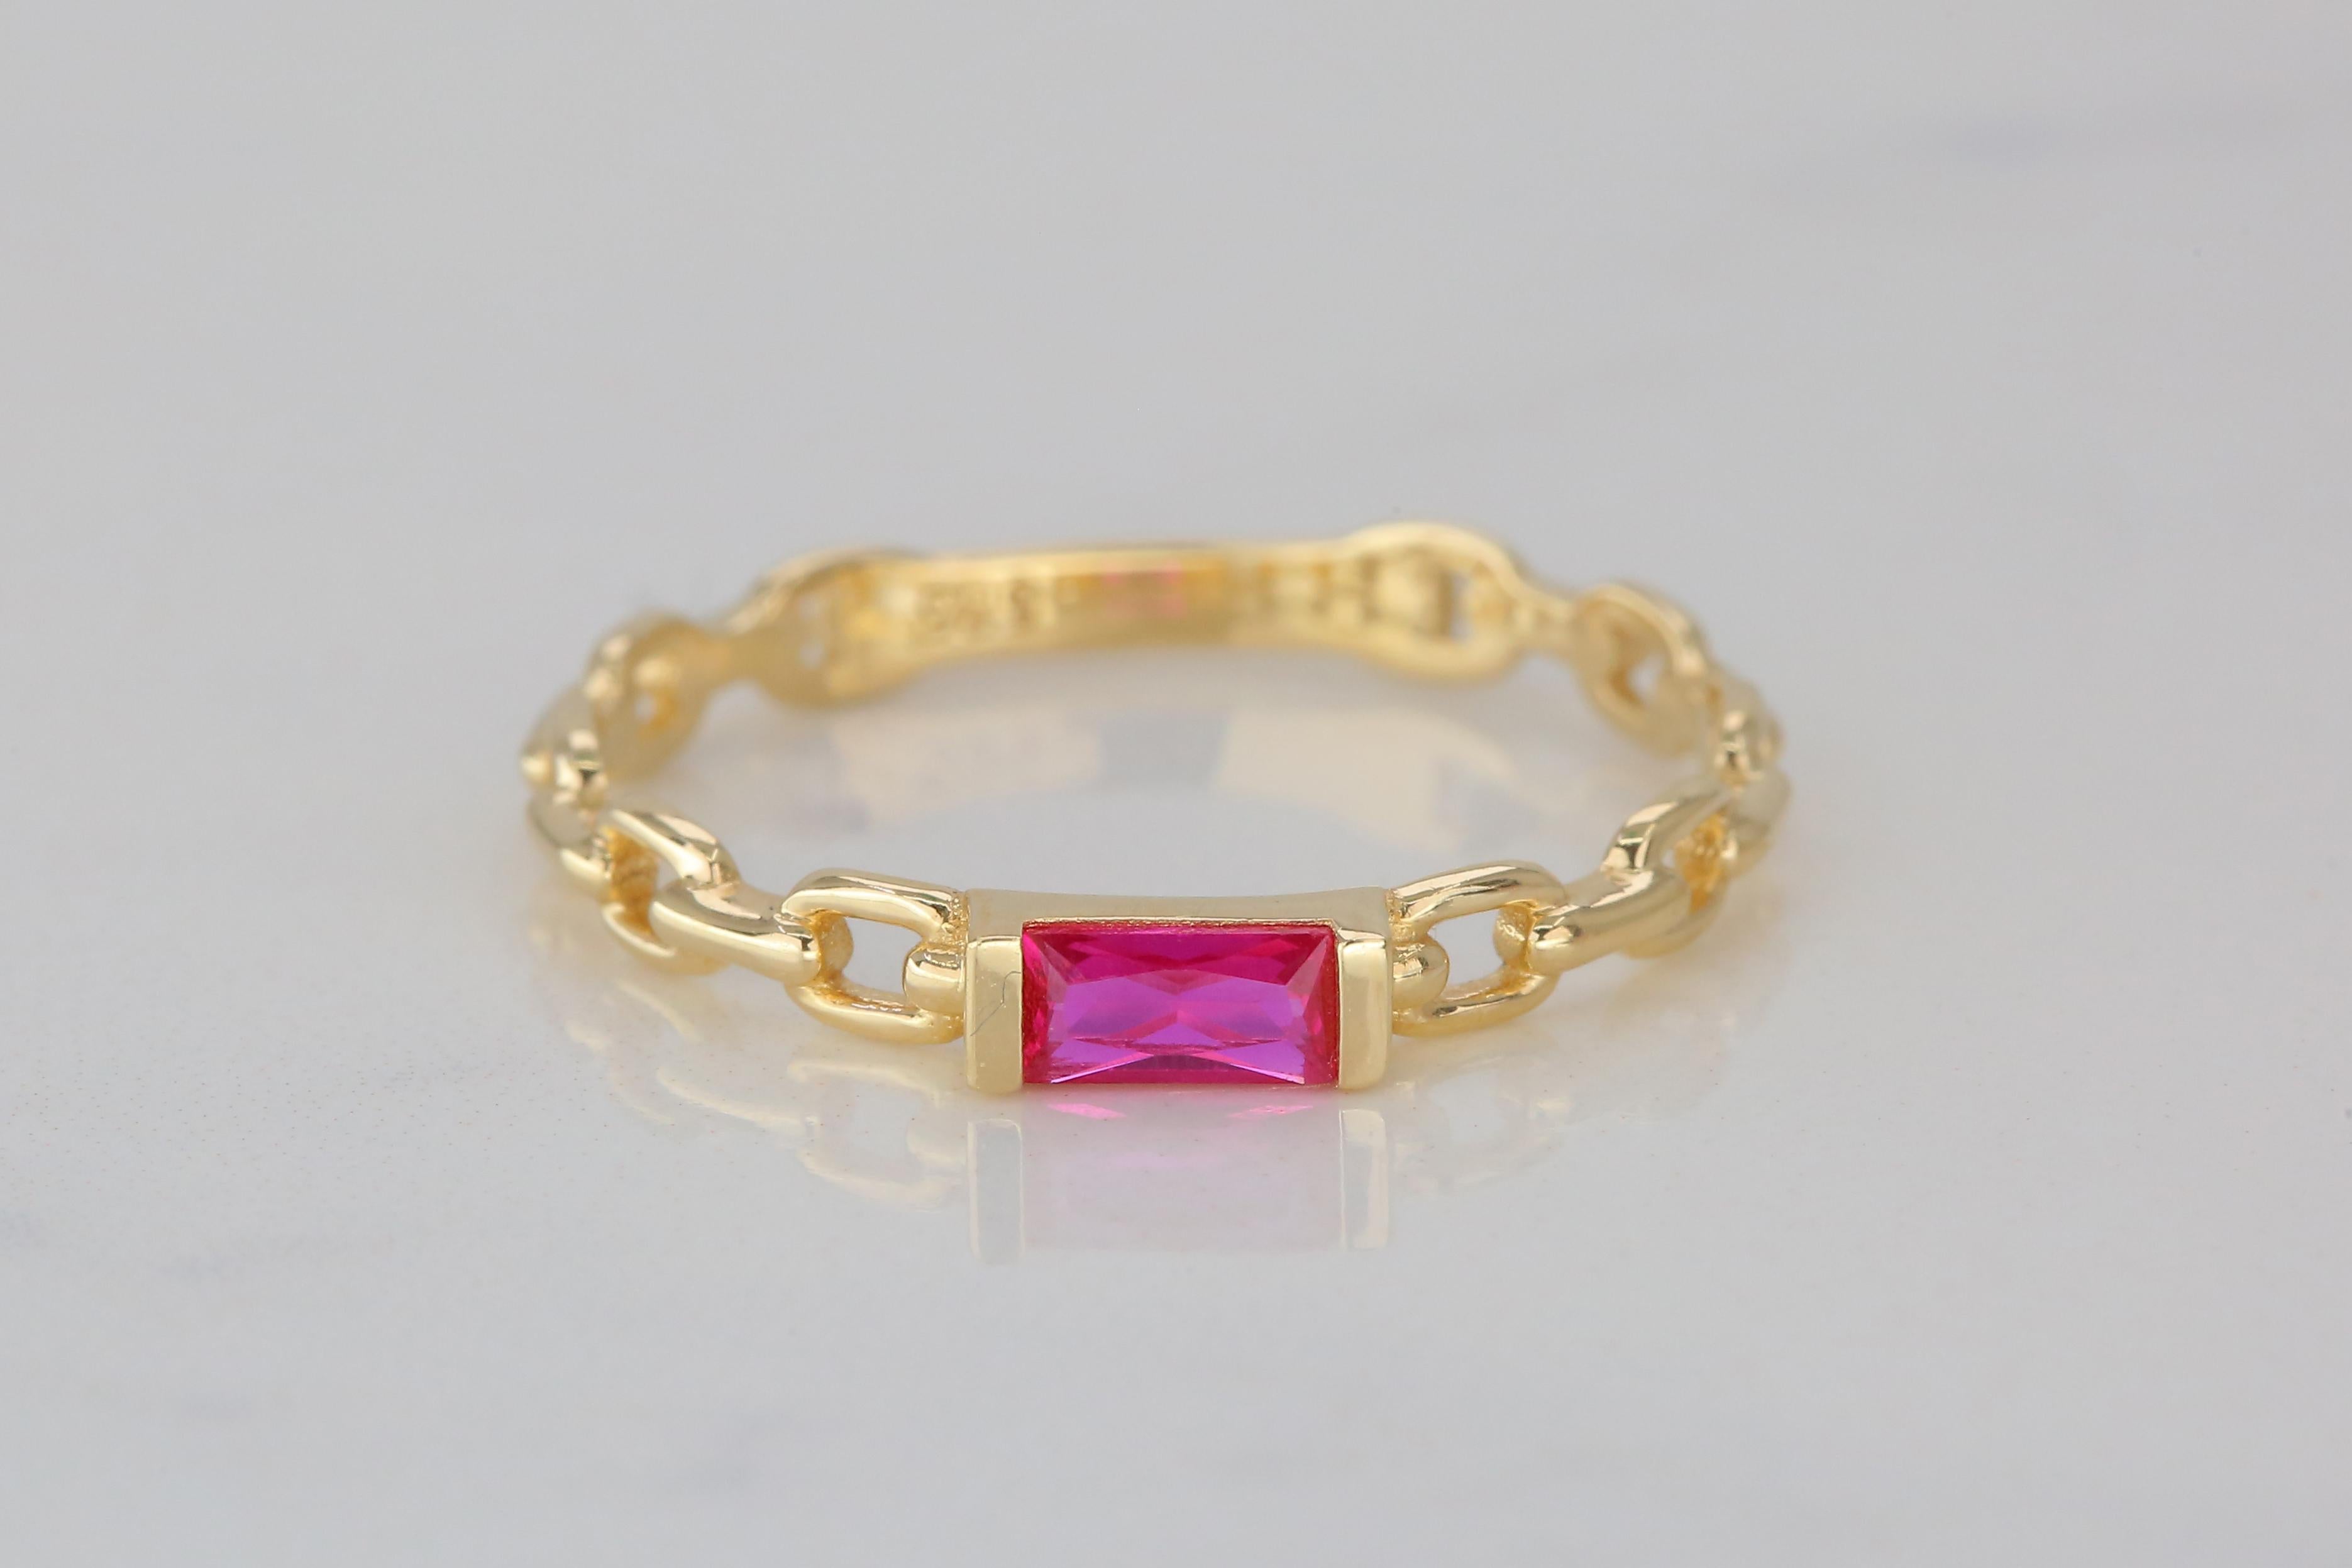 For Sale:  14 K Solid Gold Chain Link Ring -with Pink Quartz, Modern Minimal Ring 2